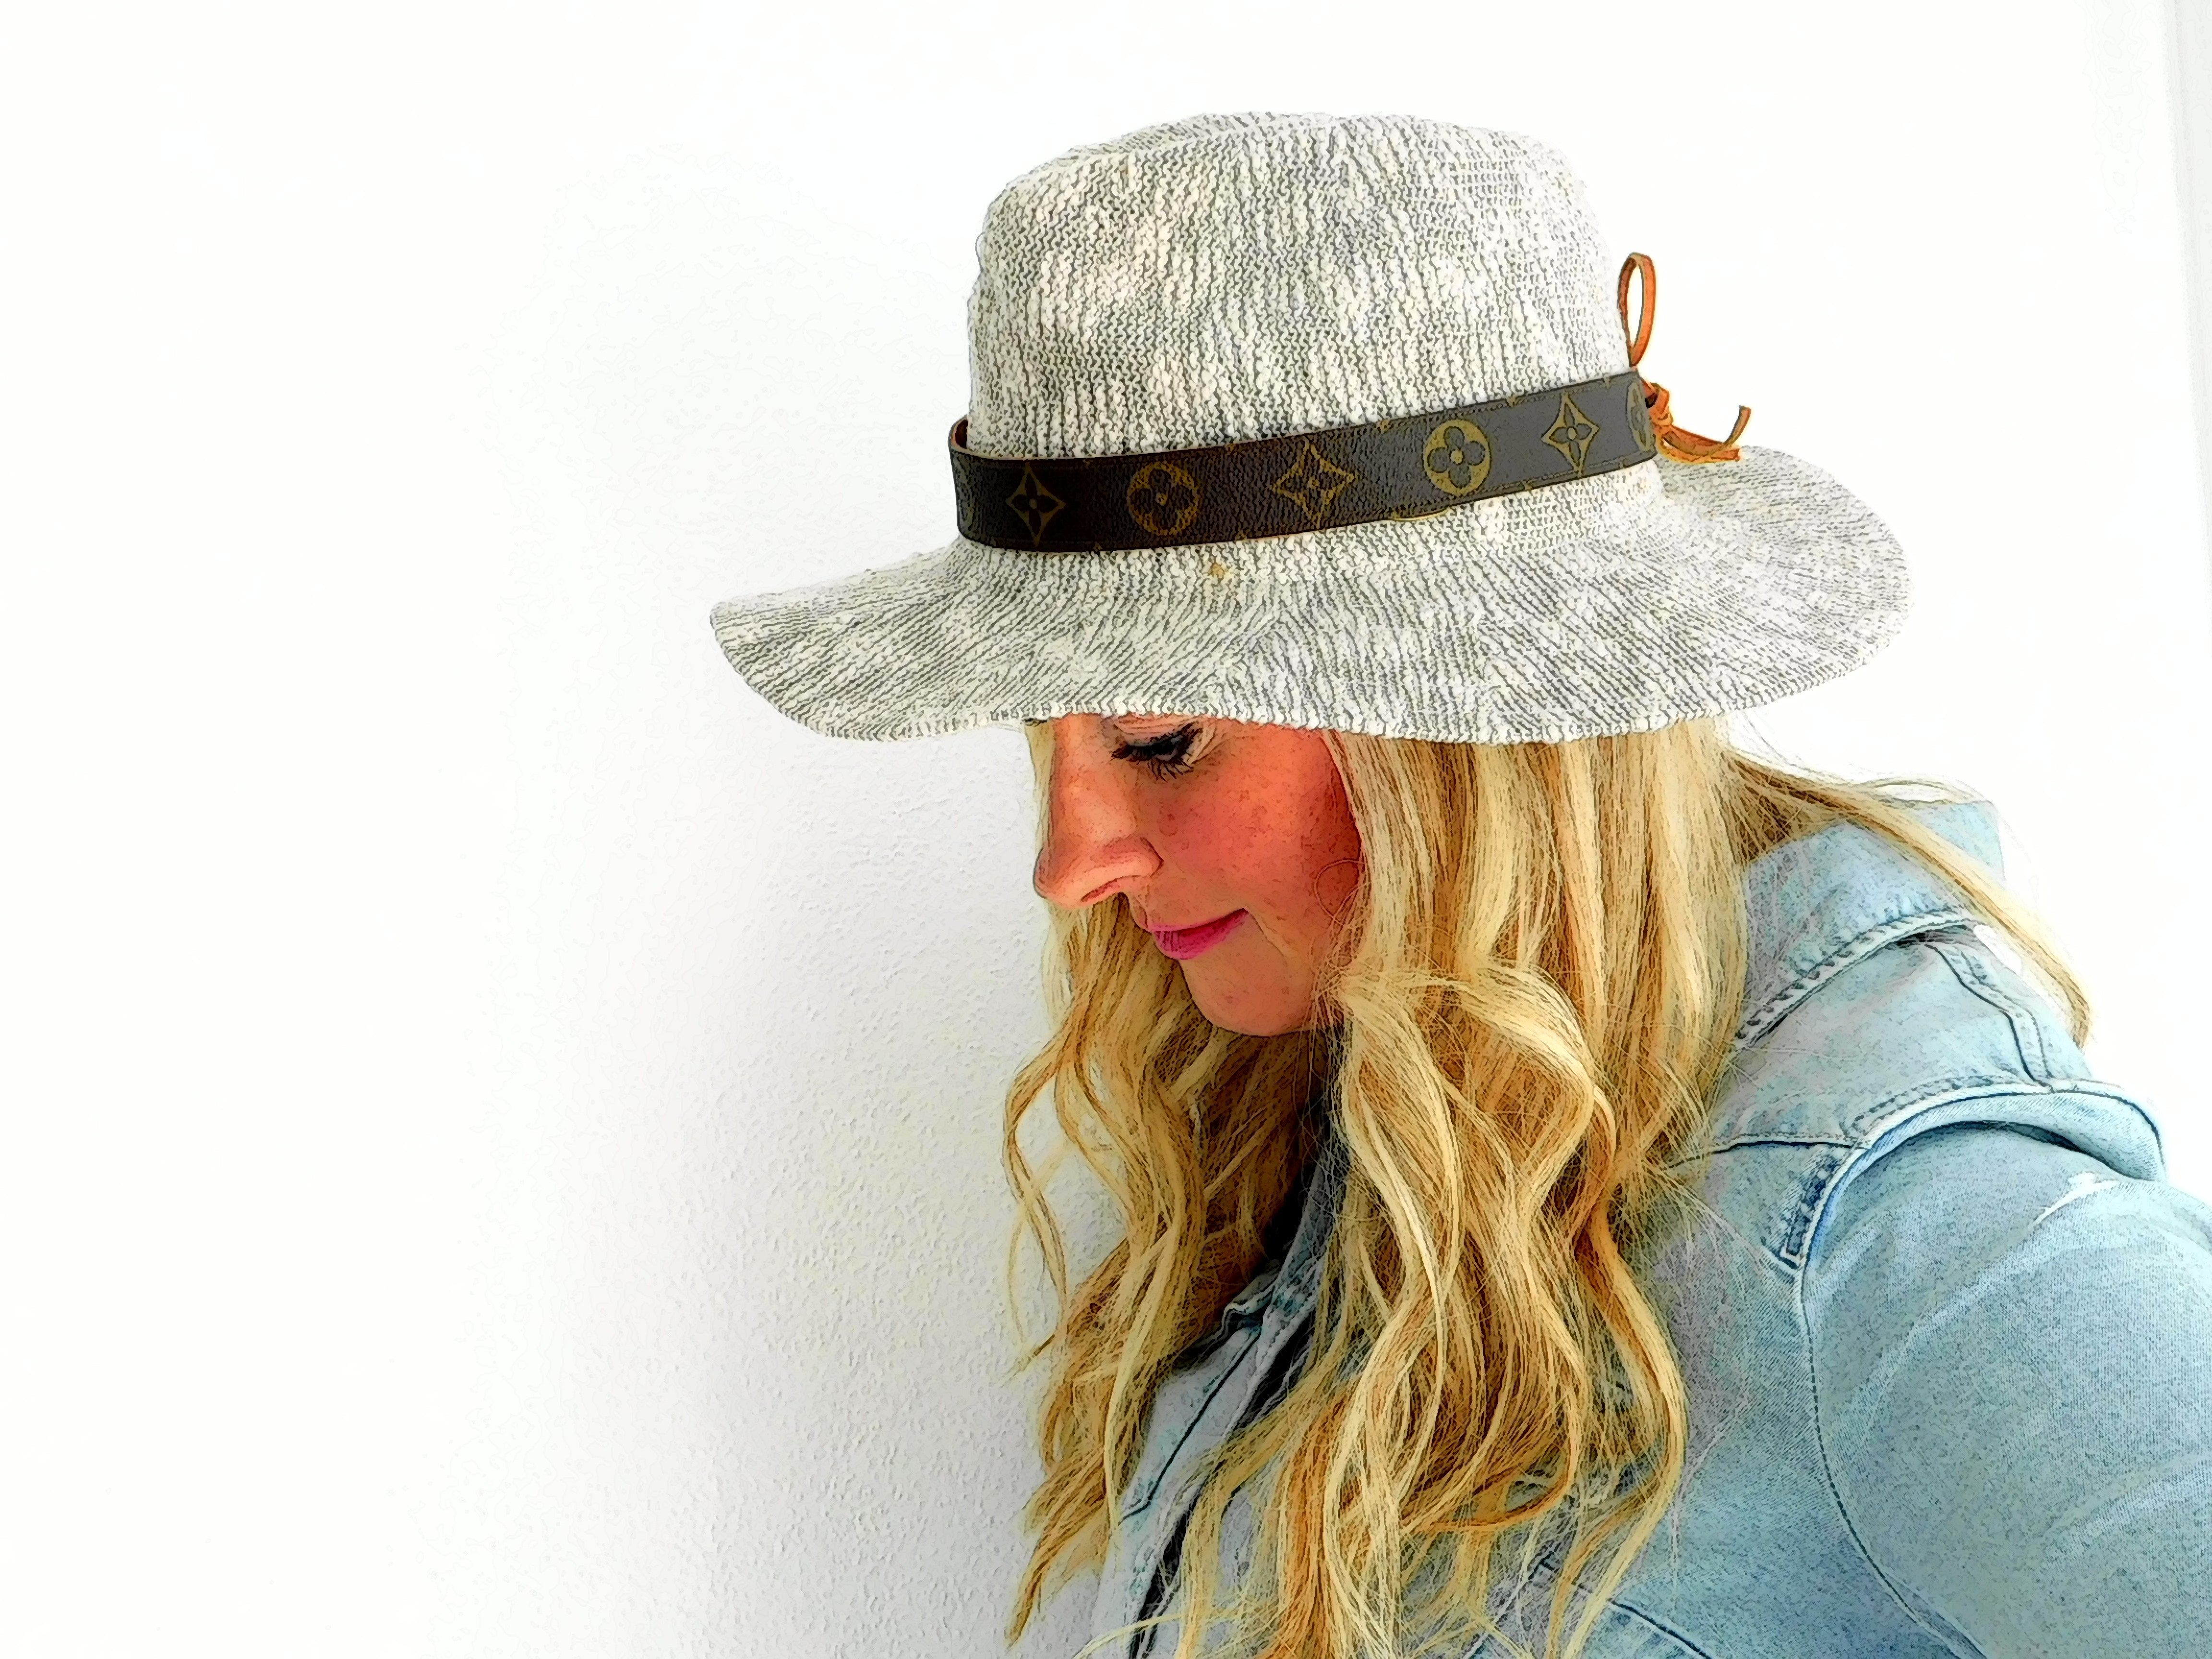 Patches of Upcycling Cowboy Sun Hat in Grey with Louis Vuitton Ribbon –  Stealing Underwear